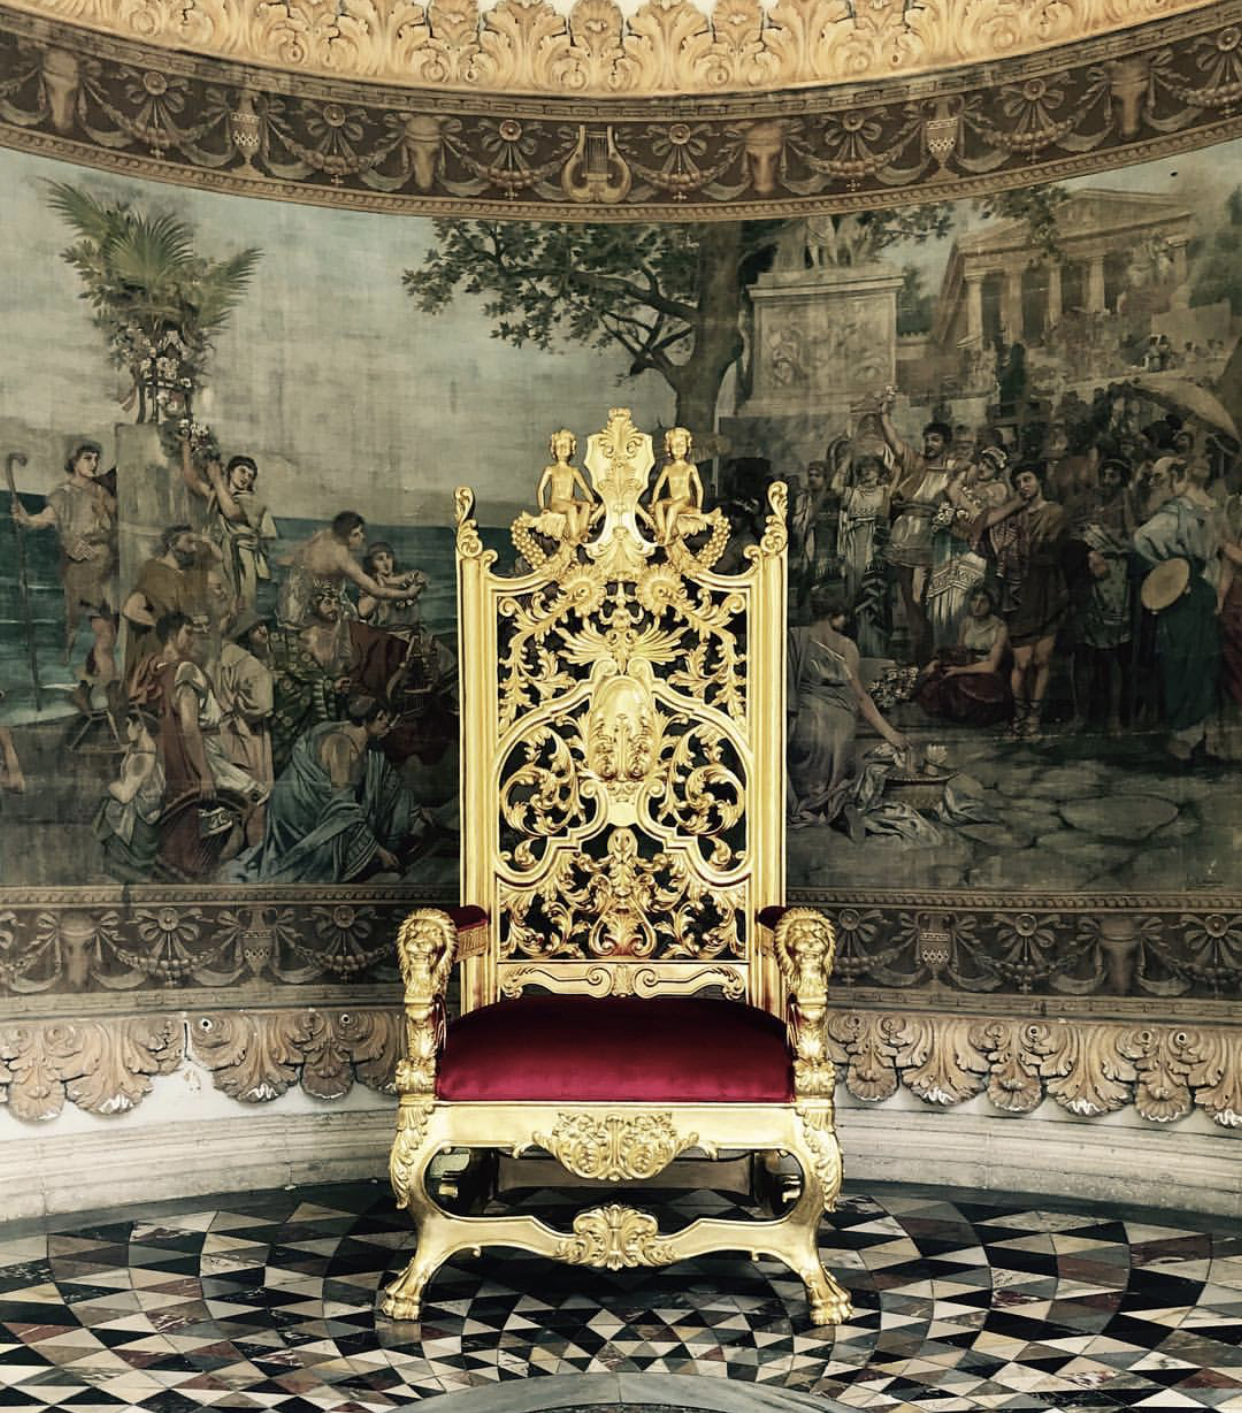 Reign of Thrones~12 Royal King/Queen Throne Chairs